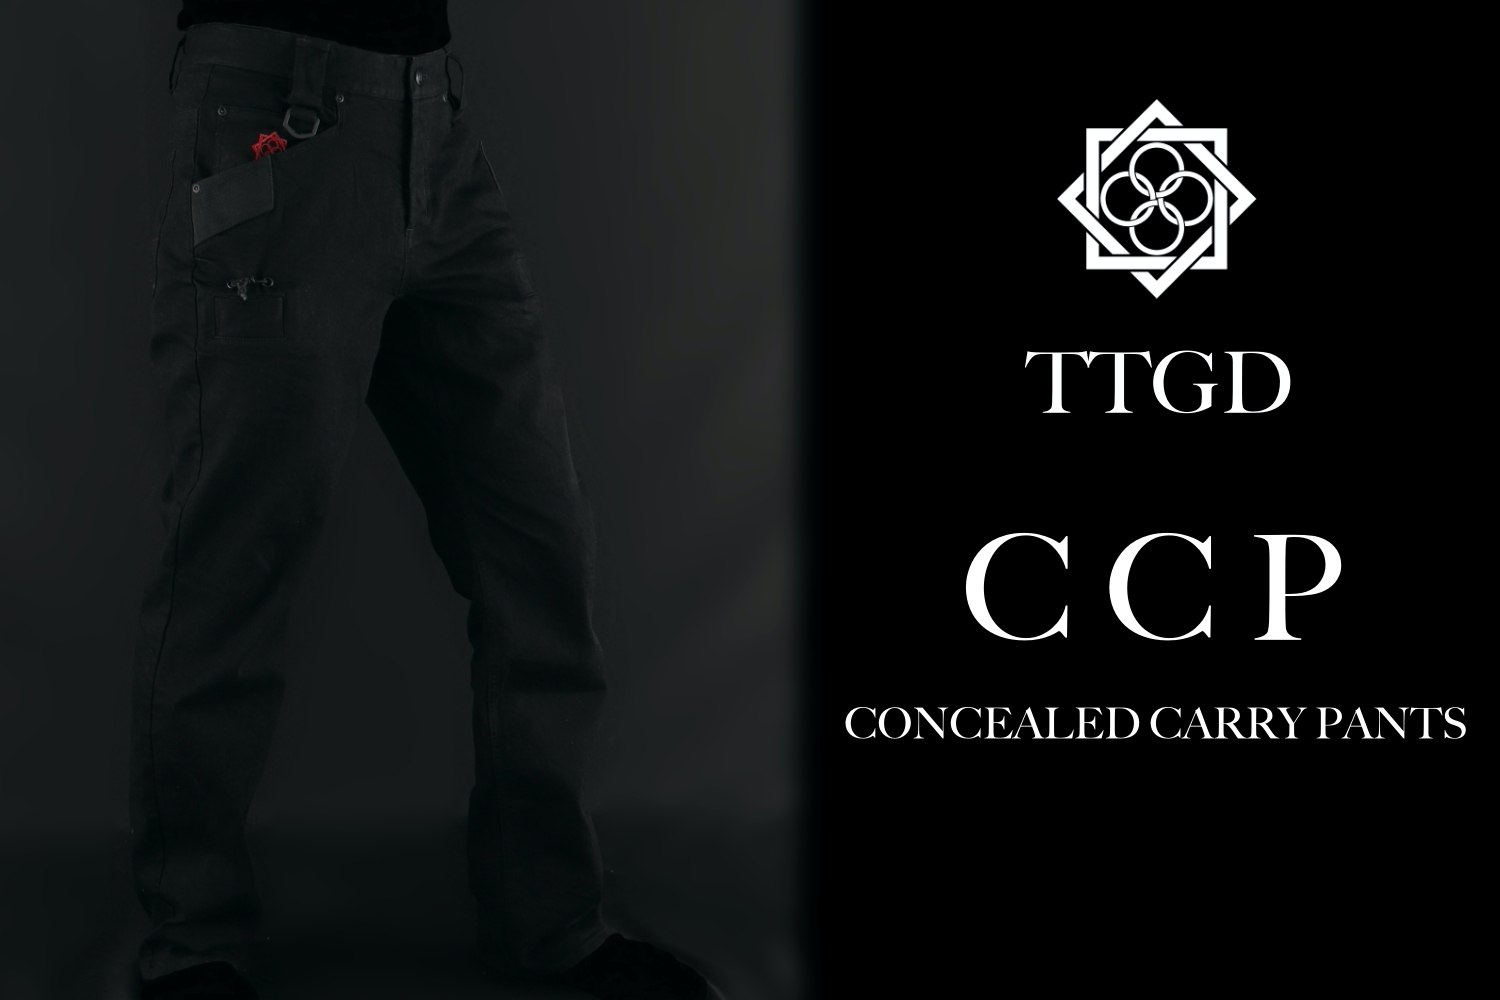 Concealed CARRY PANTS